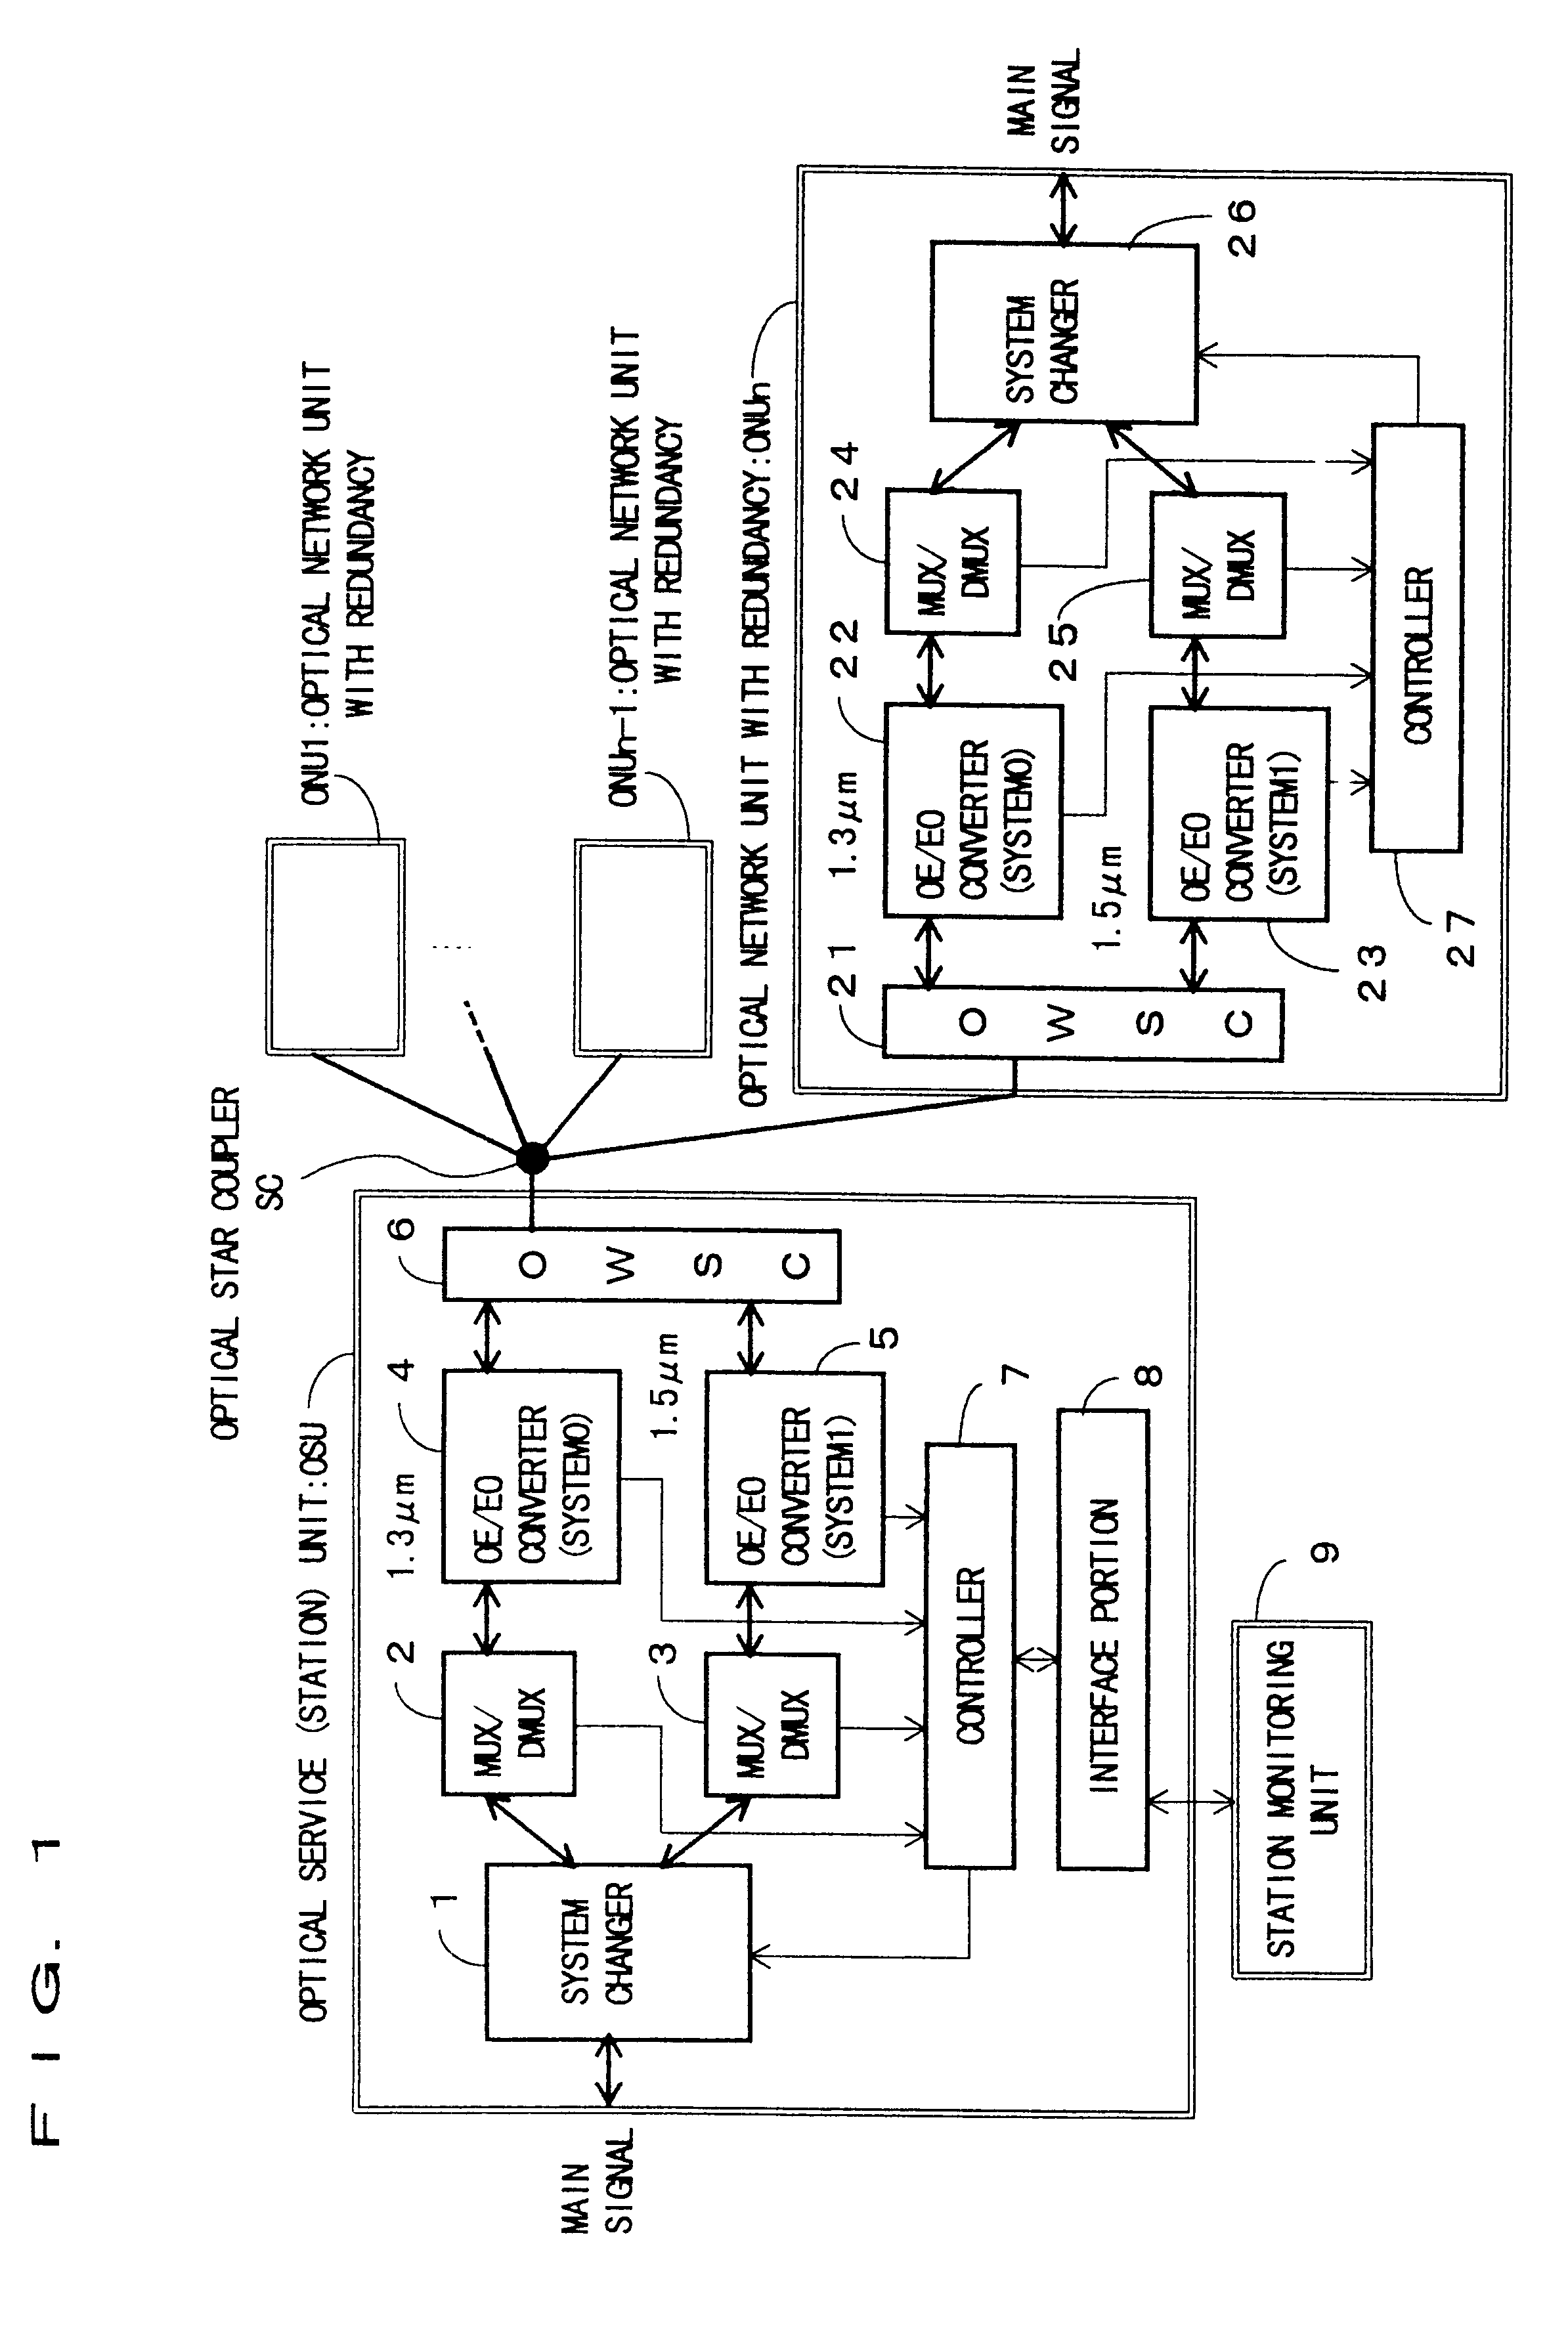 Optical subscriber network system